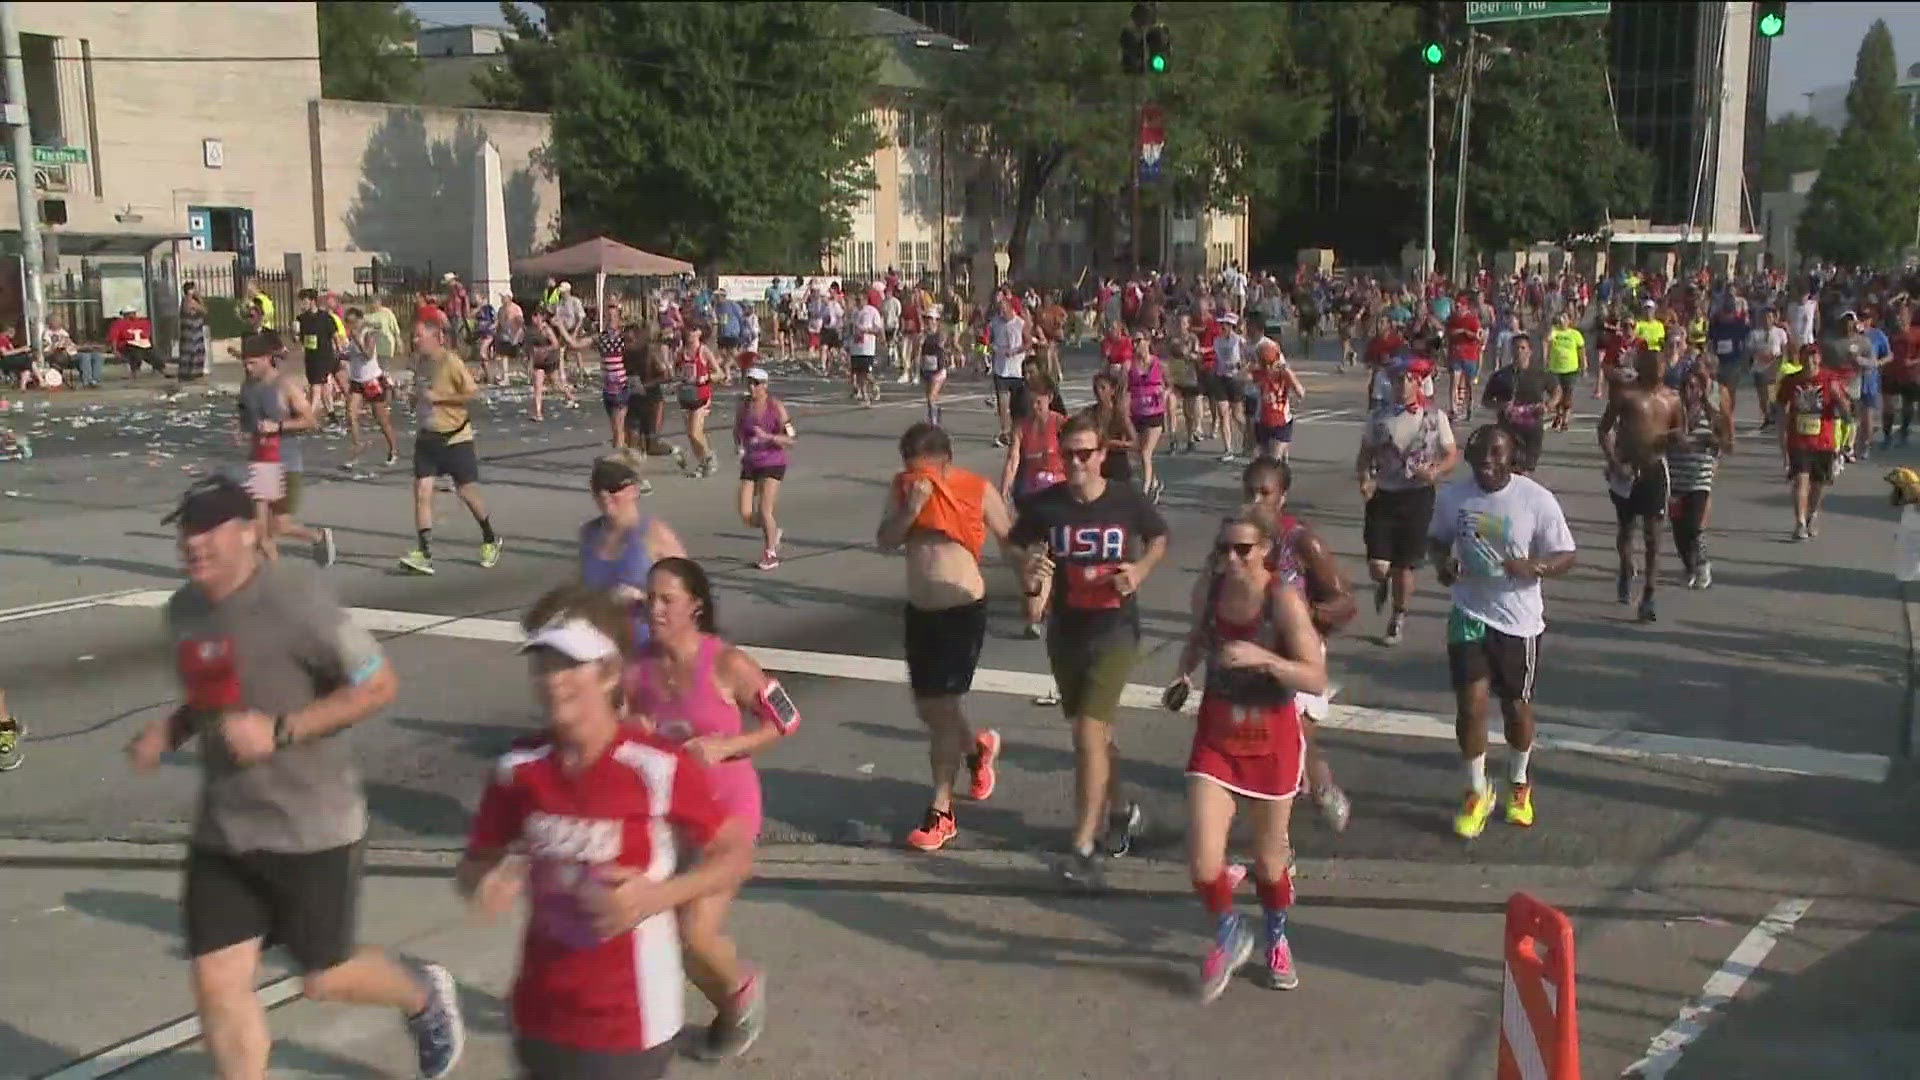 Organizers of the 55th annual AJC Peachtree Road Race are working to prepare the course and remove any hazards to runners.